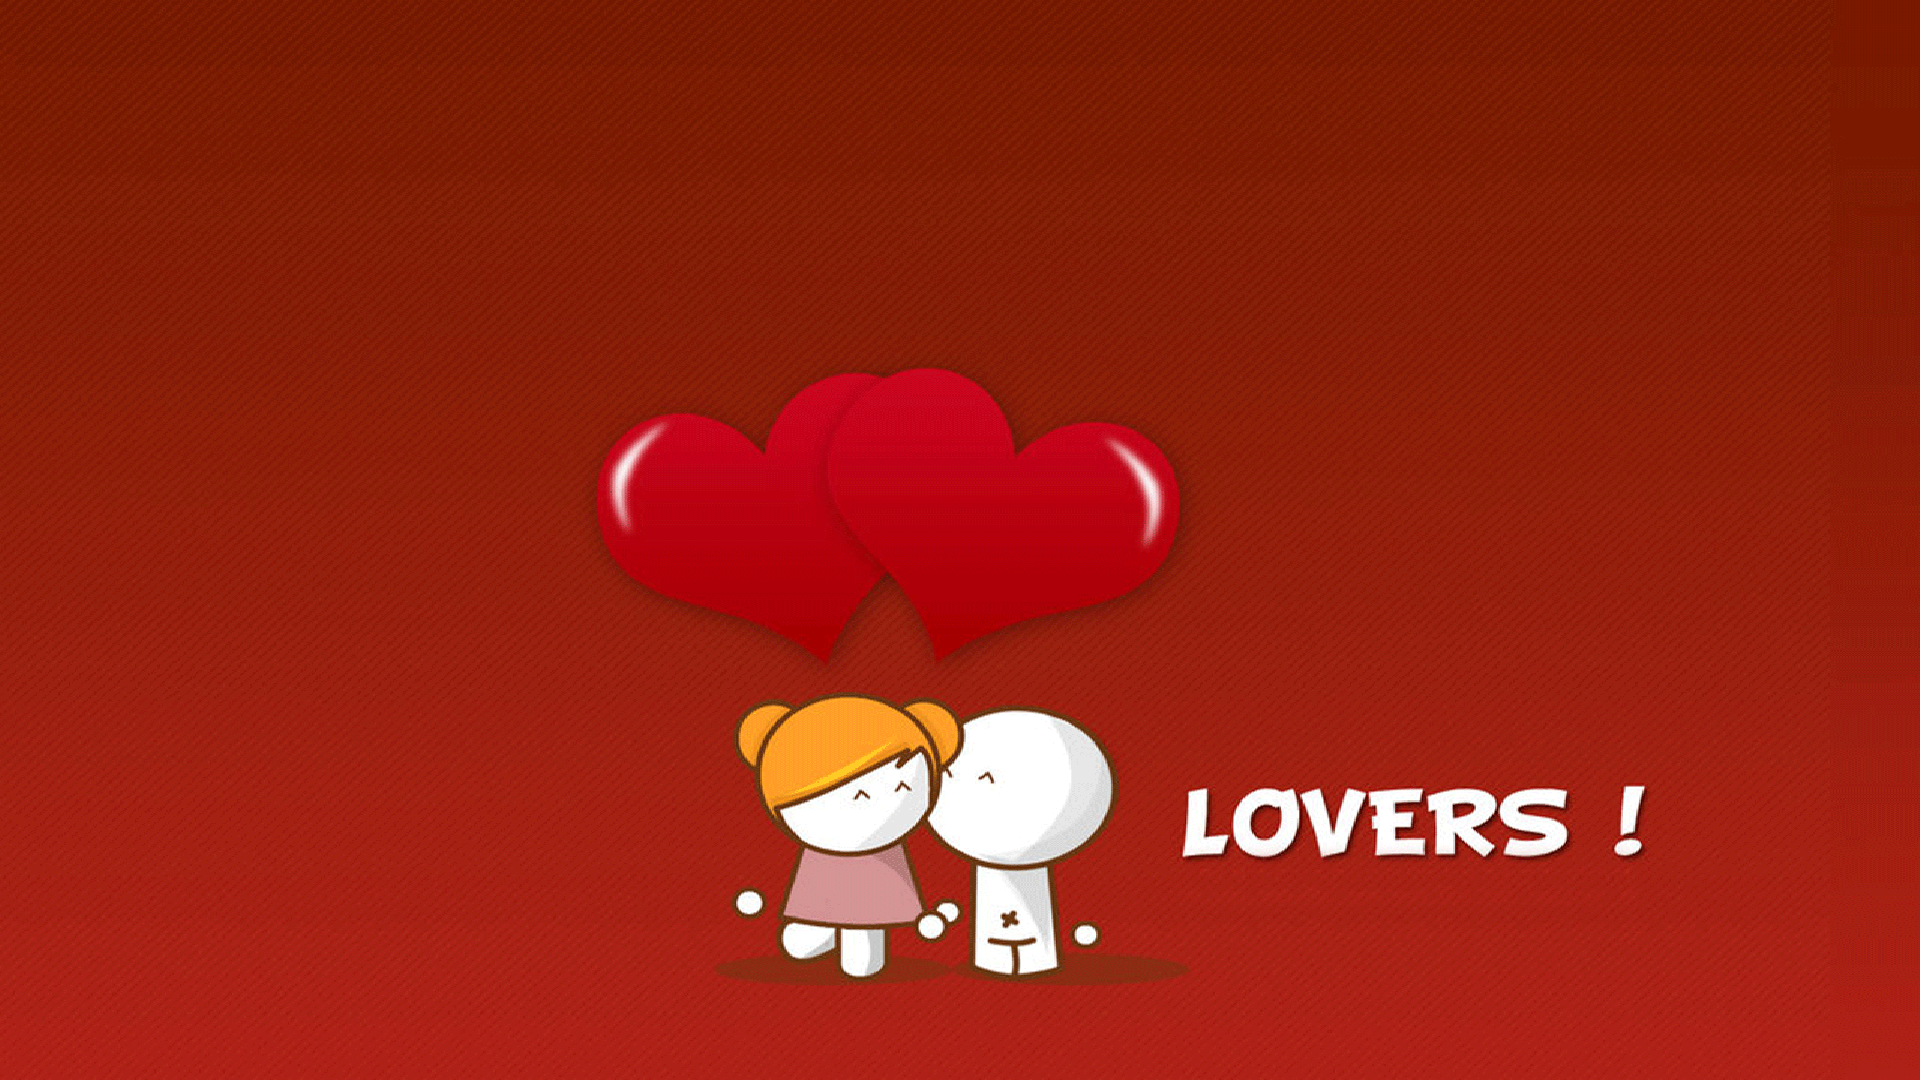 Cute I Love U Images - Wallpapers High Definition